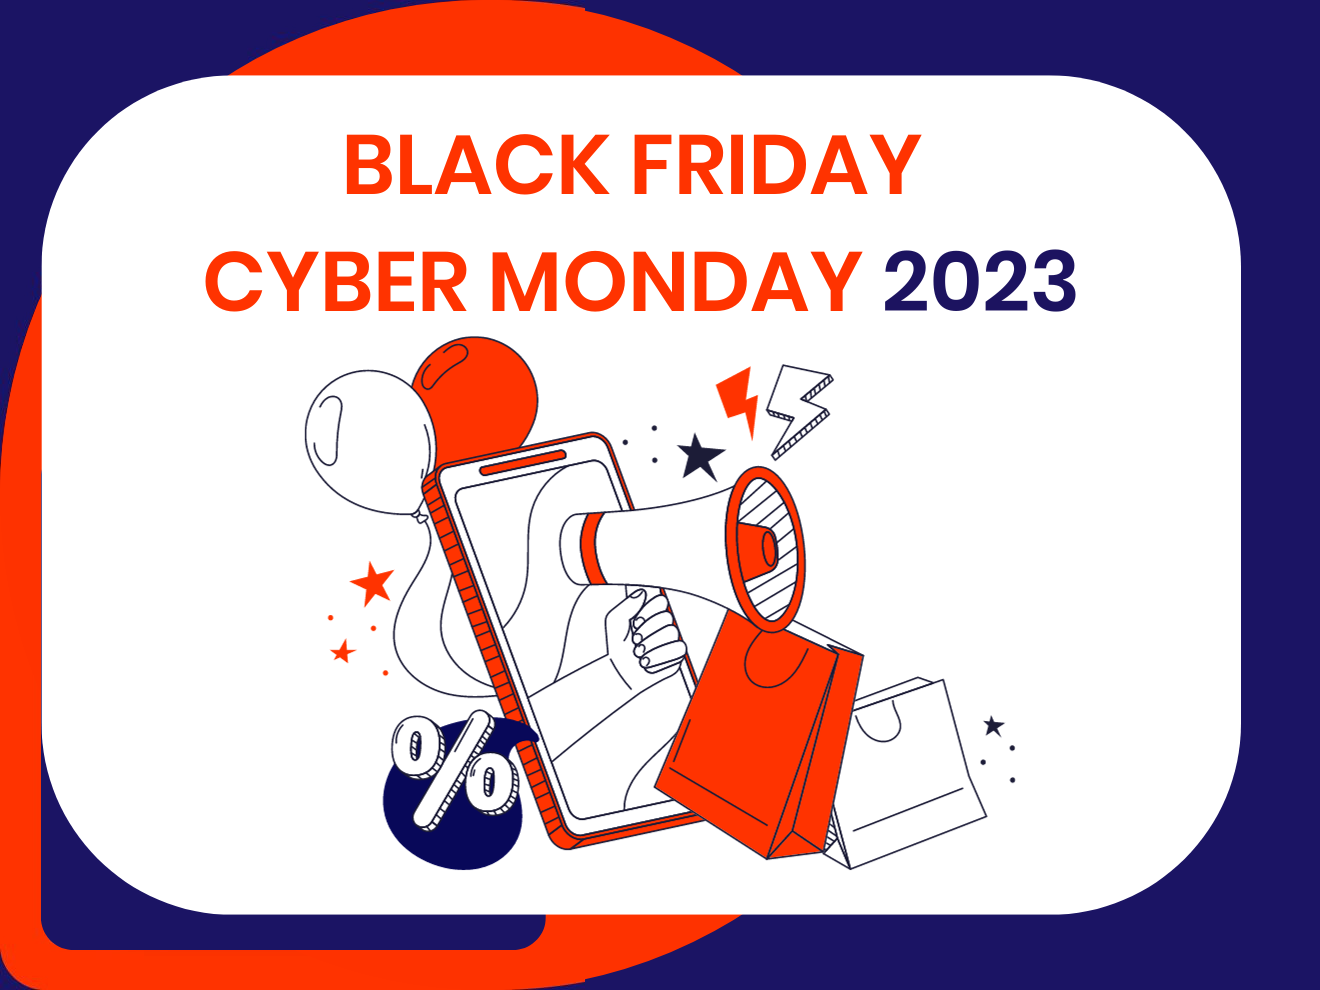 Black Friday Cyber Monday 2023: Is it worth getting involved?